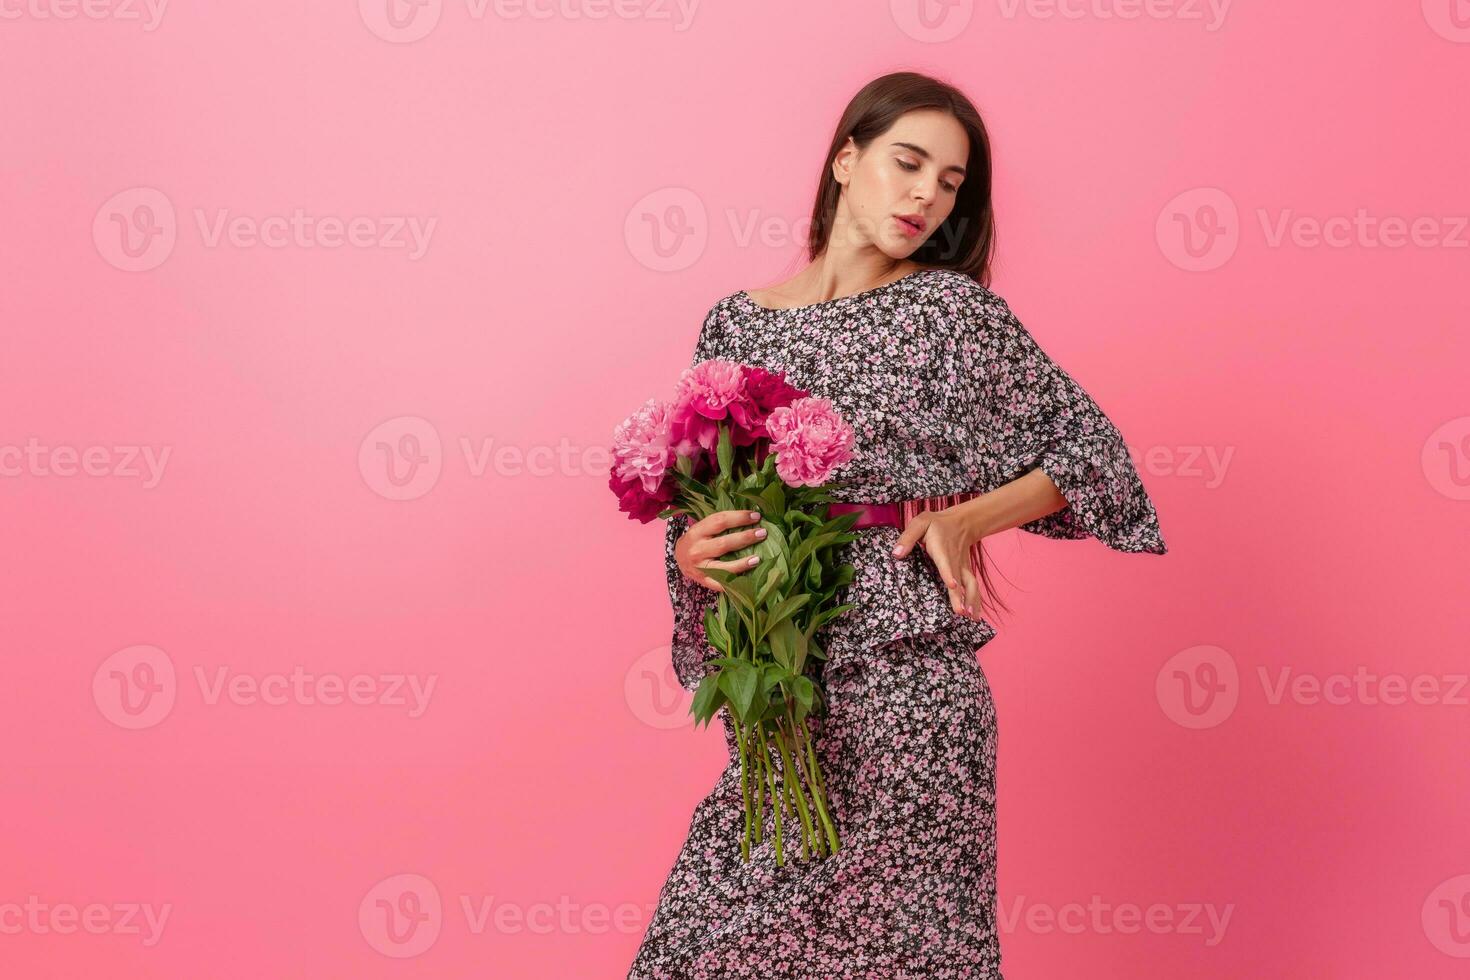 woman style on pink background photo